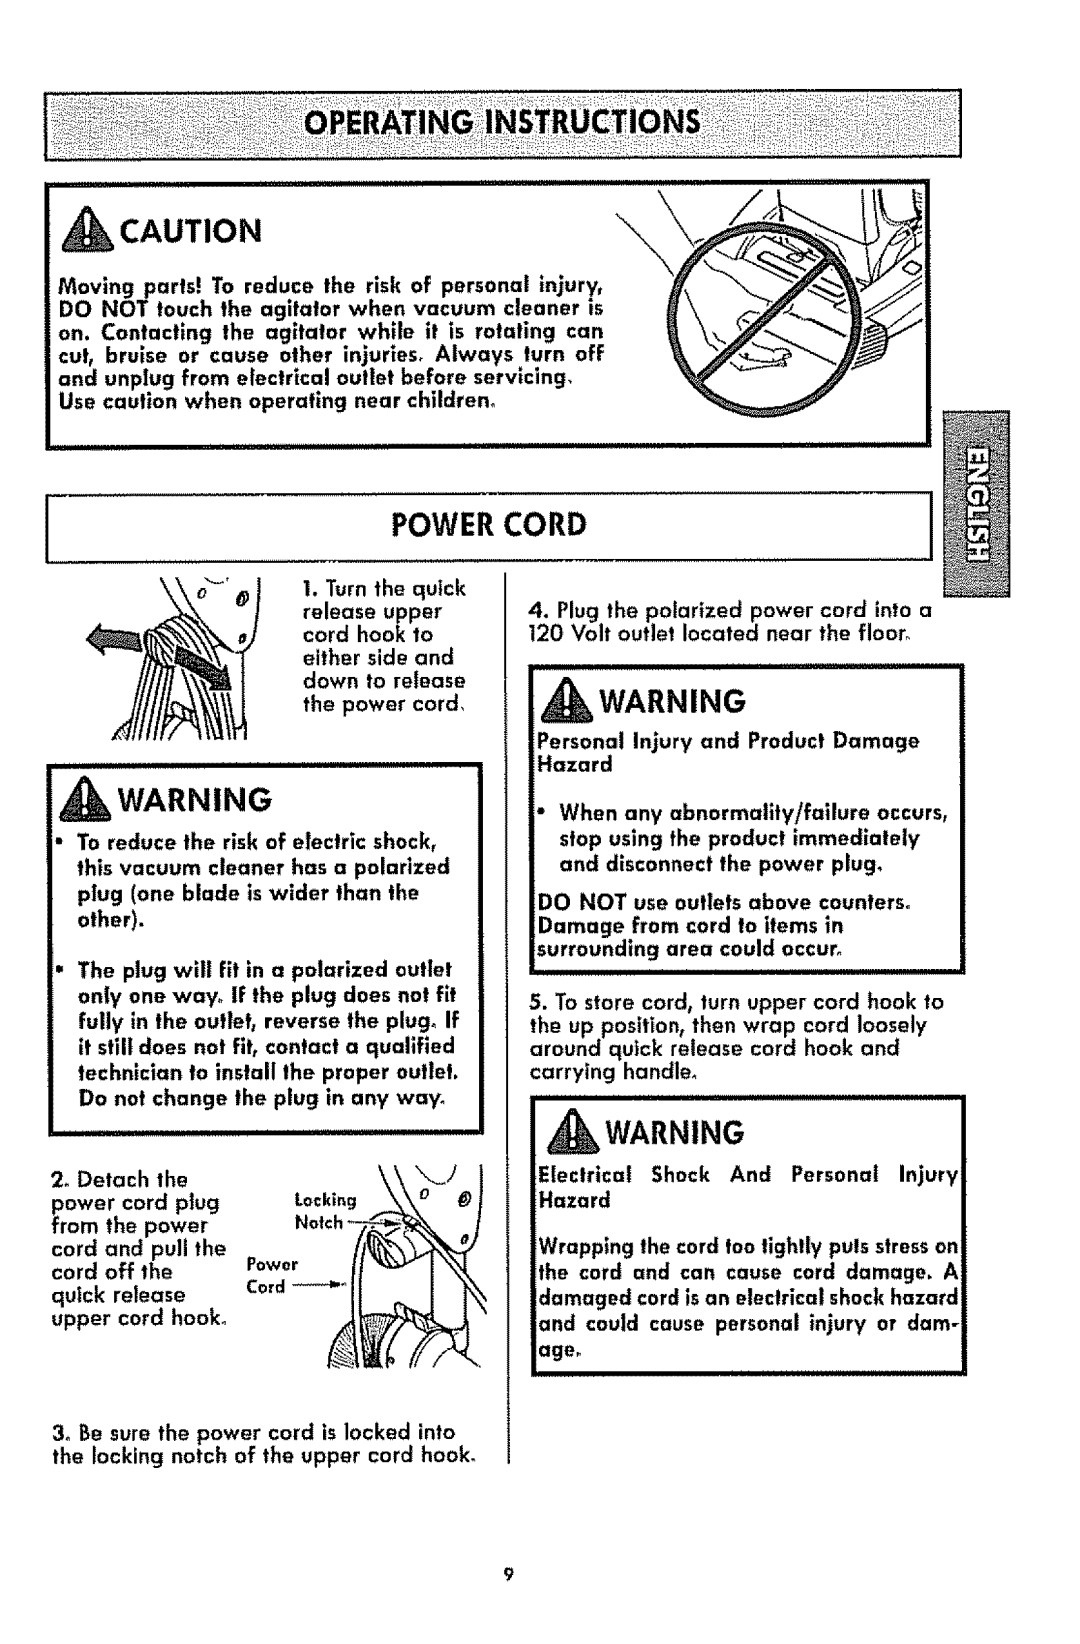 Kenmore 116.3181 manual _Caution, Power Cord, _Warning, I. Turnthe quick, either side and down to release the power cord 